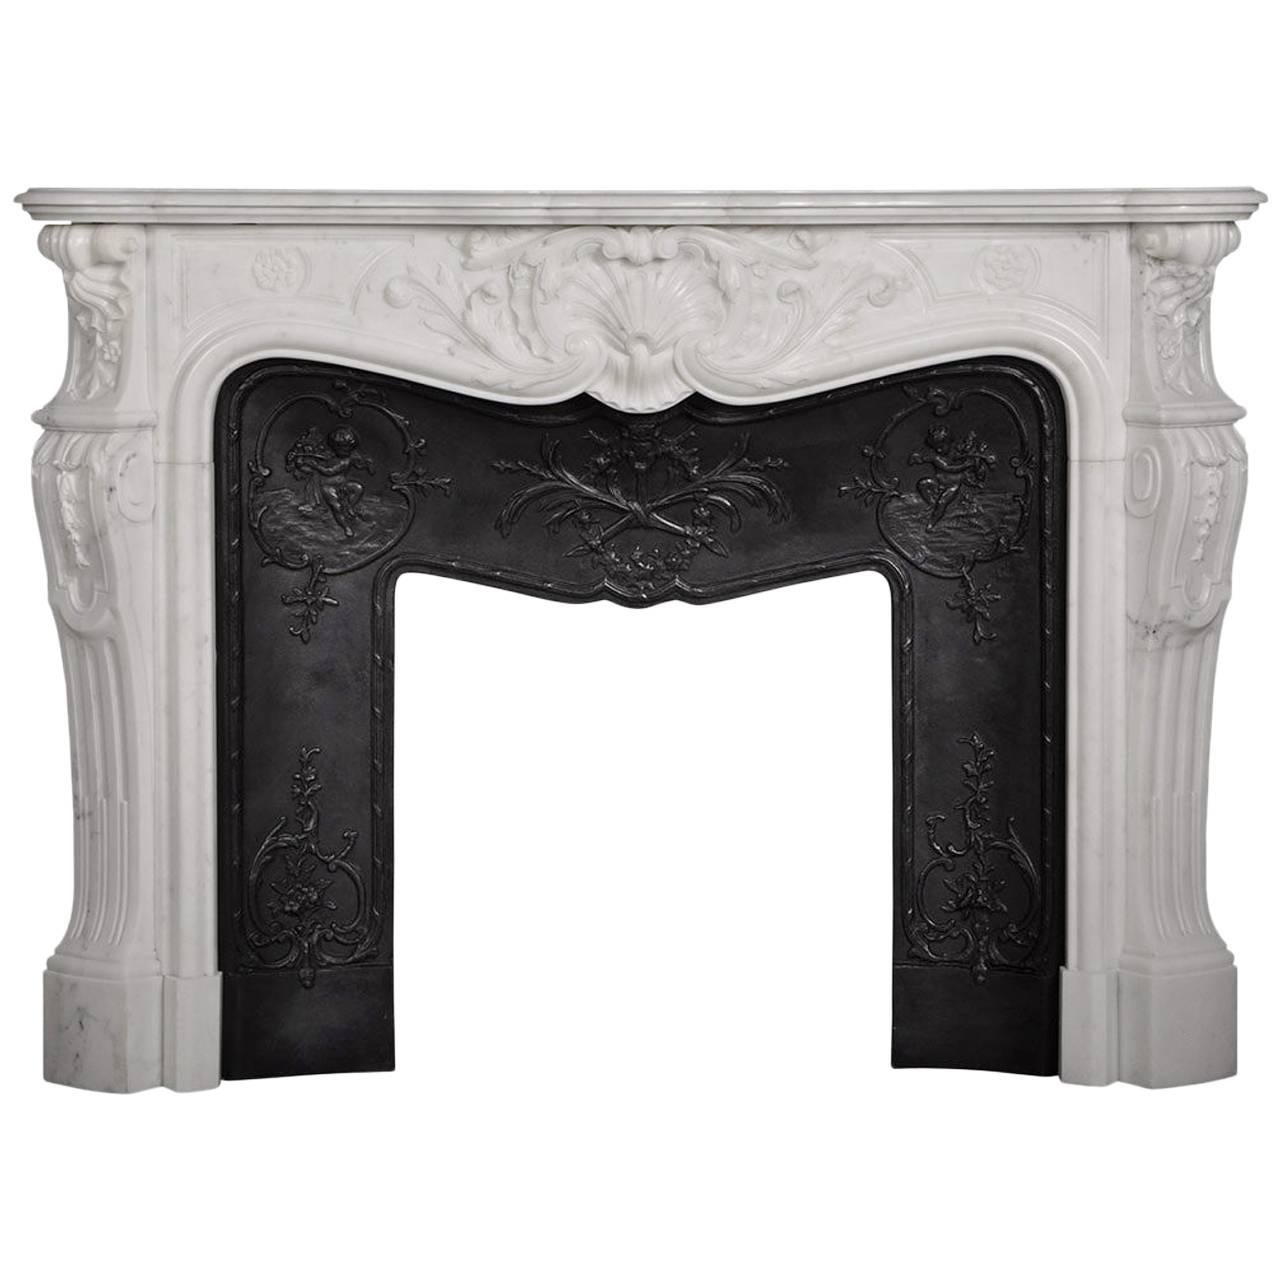 "Marquise de Tournelle" Louis XV Style Fireplace in Carrara White Marble For Sale